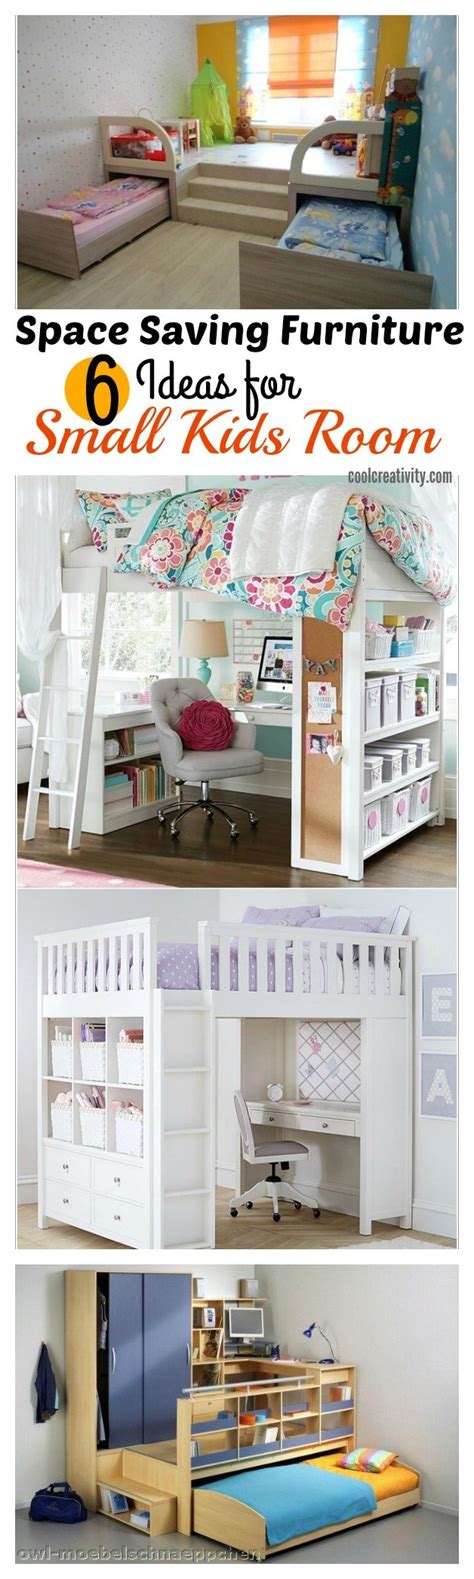 Making your small bedroom look interesting without looking too cluttered can be a challenge. 6 Space Saving Furniture Ideas for Small Kids Room